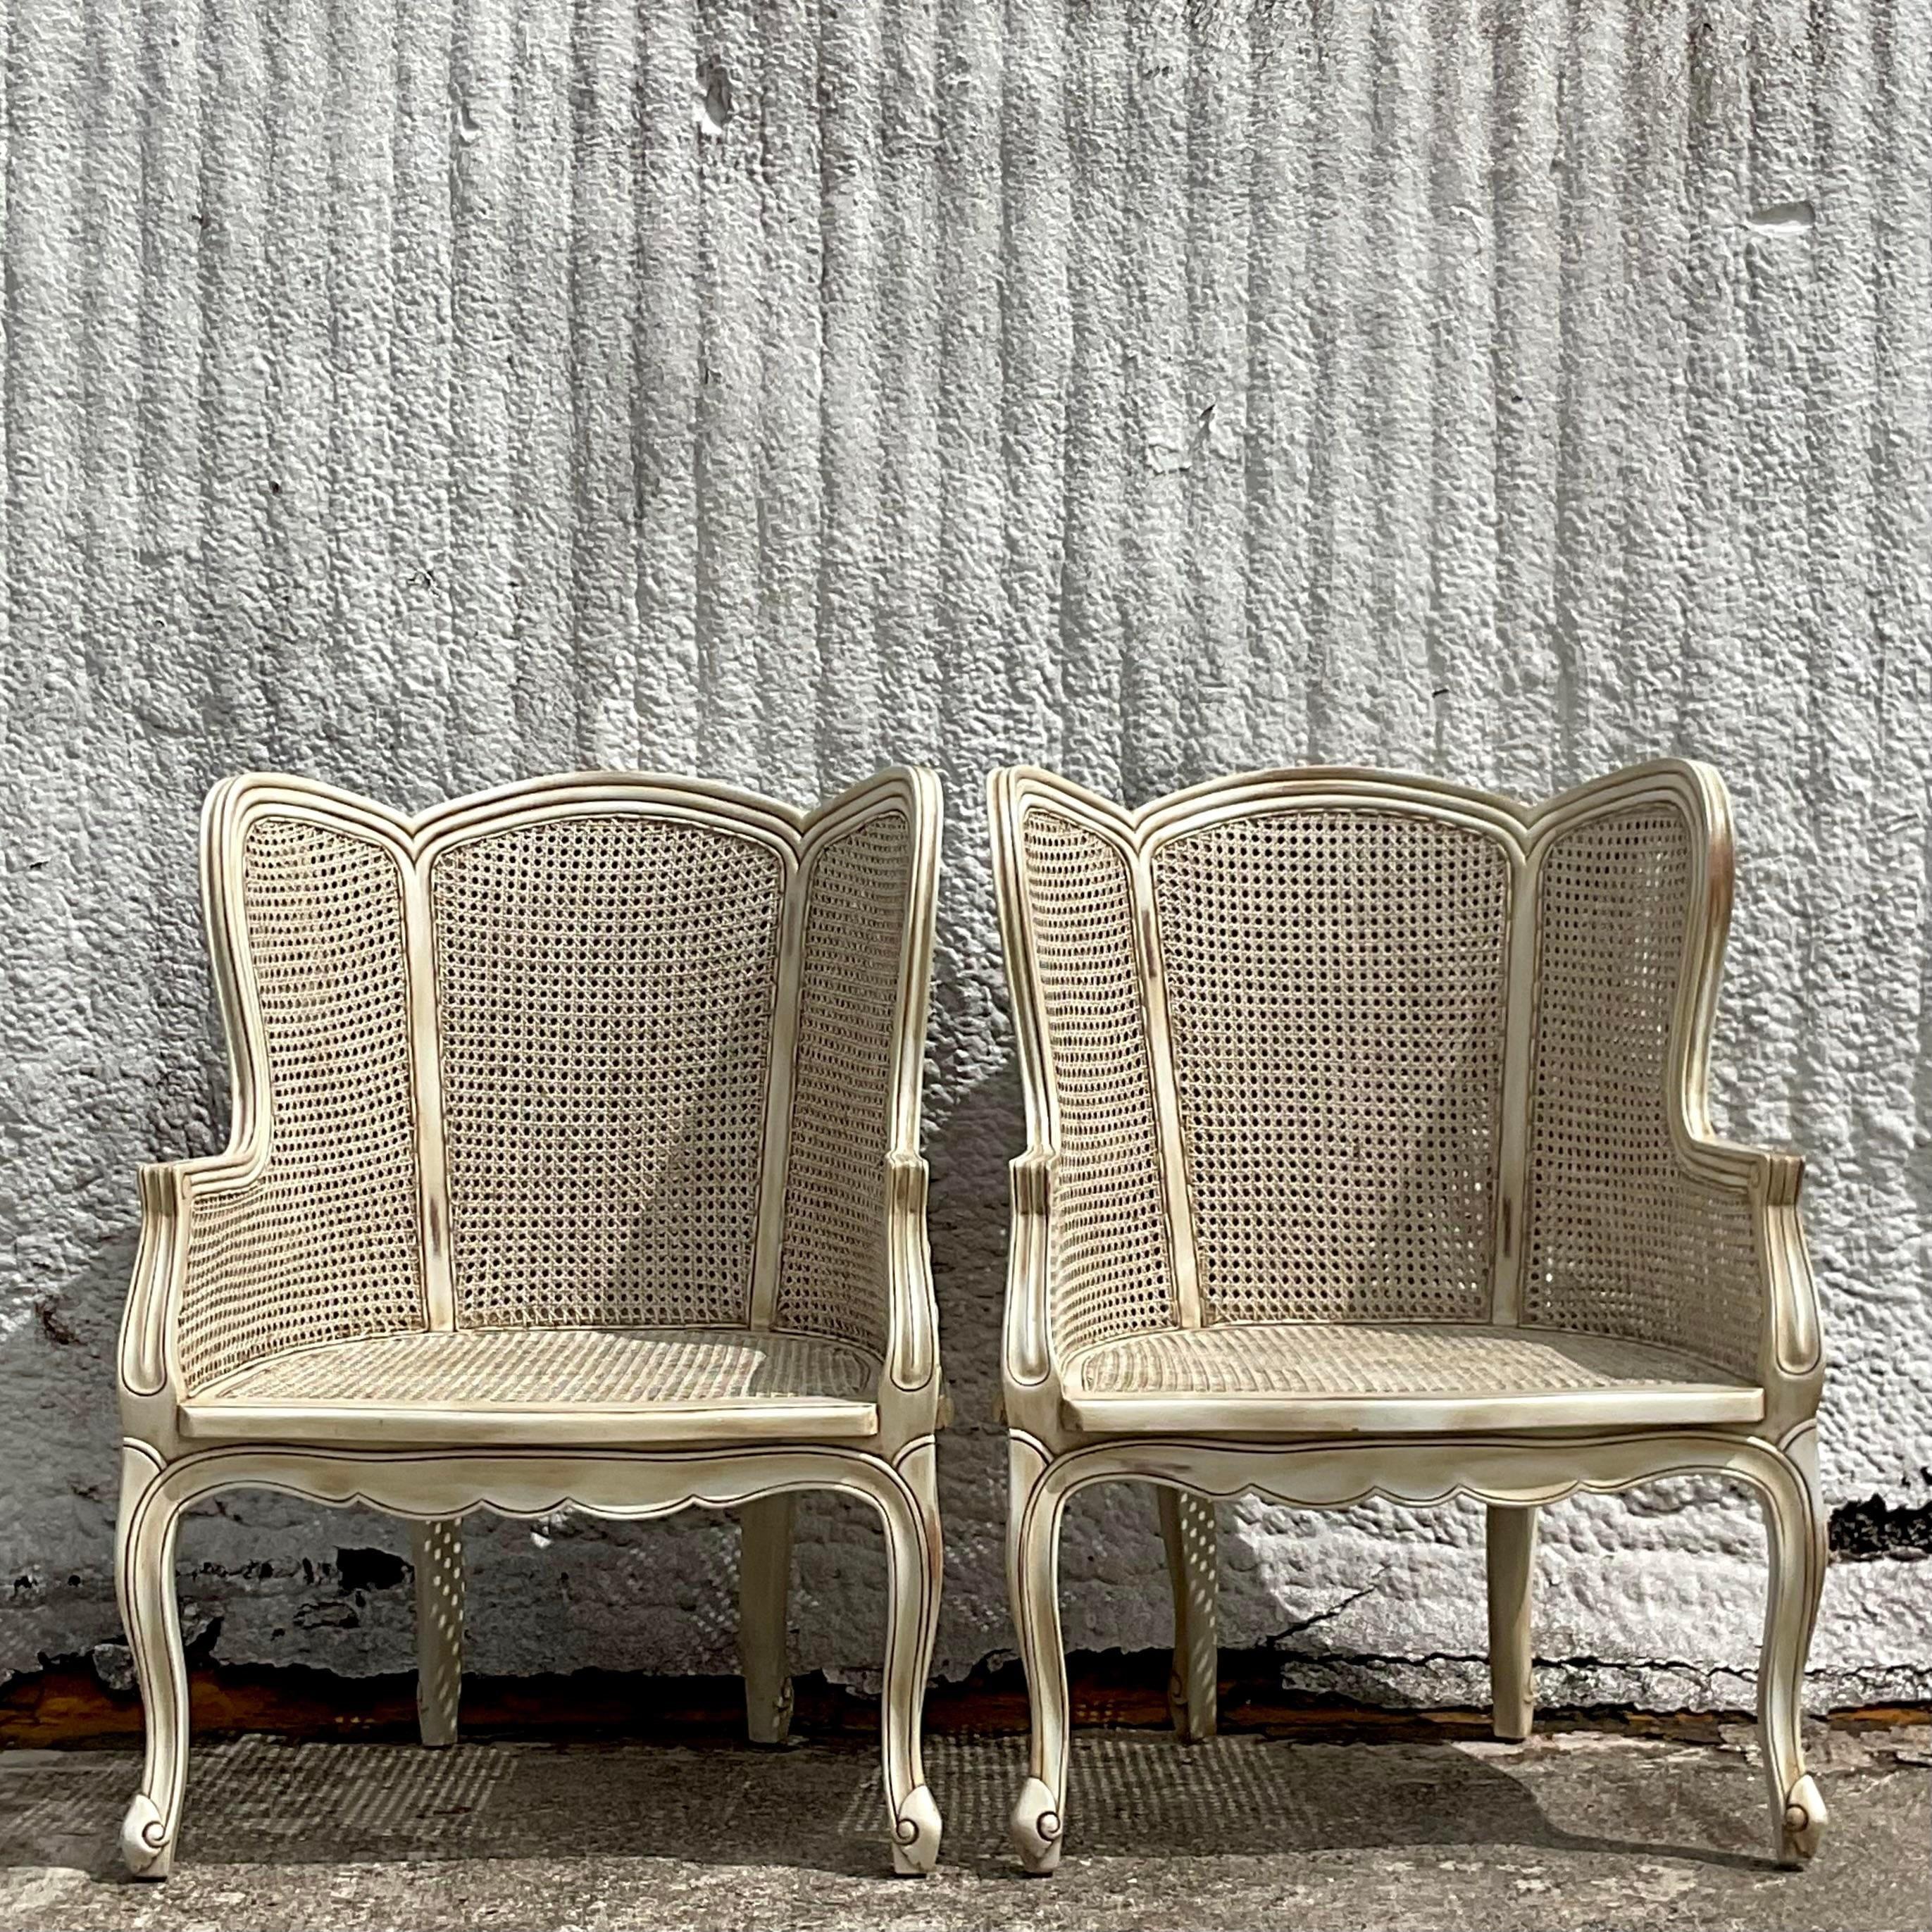 Rattan Vintage Regency Cane Panel Wingback Chairs - a Pair